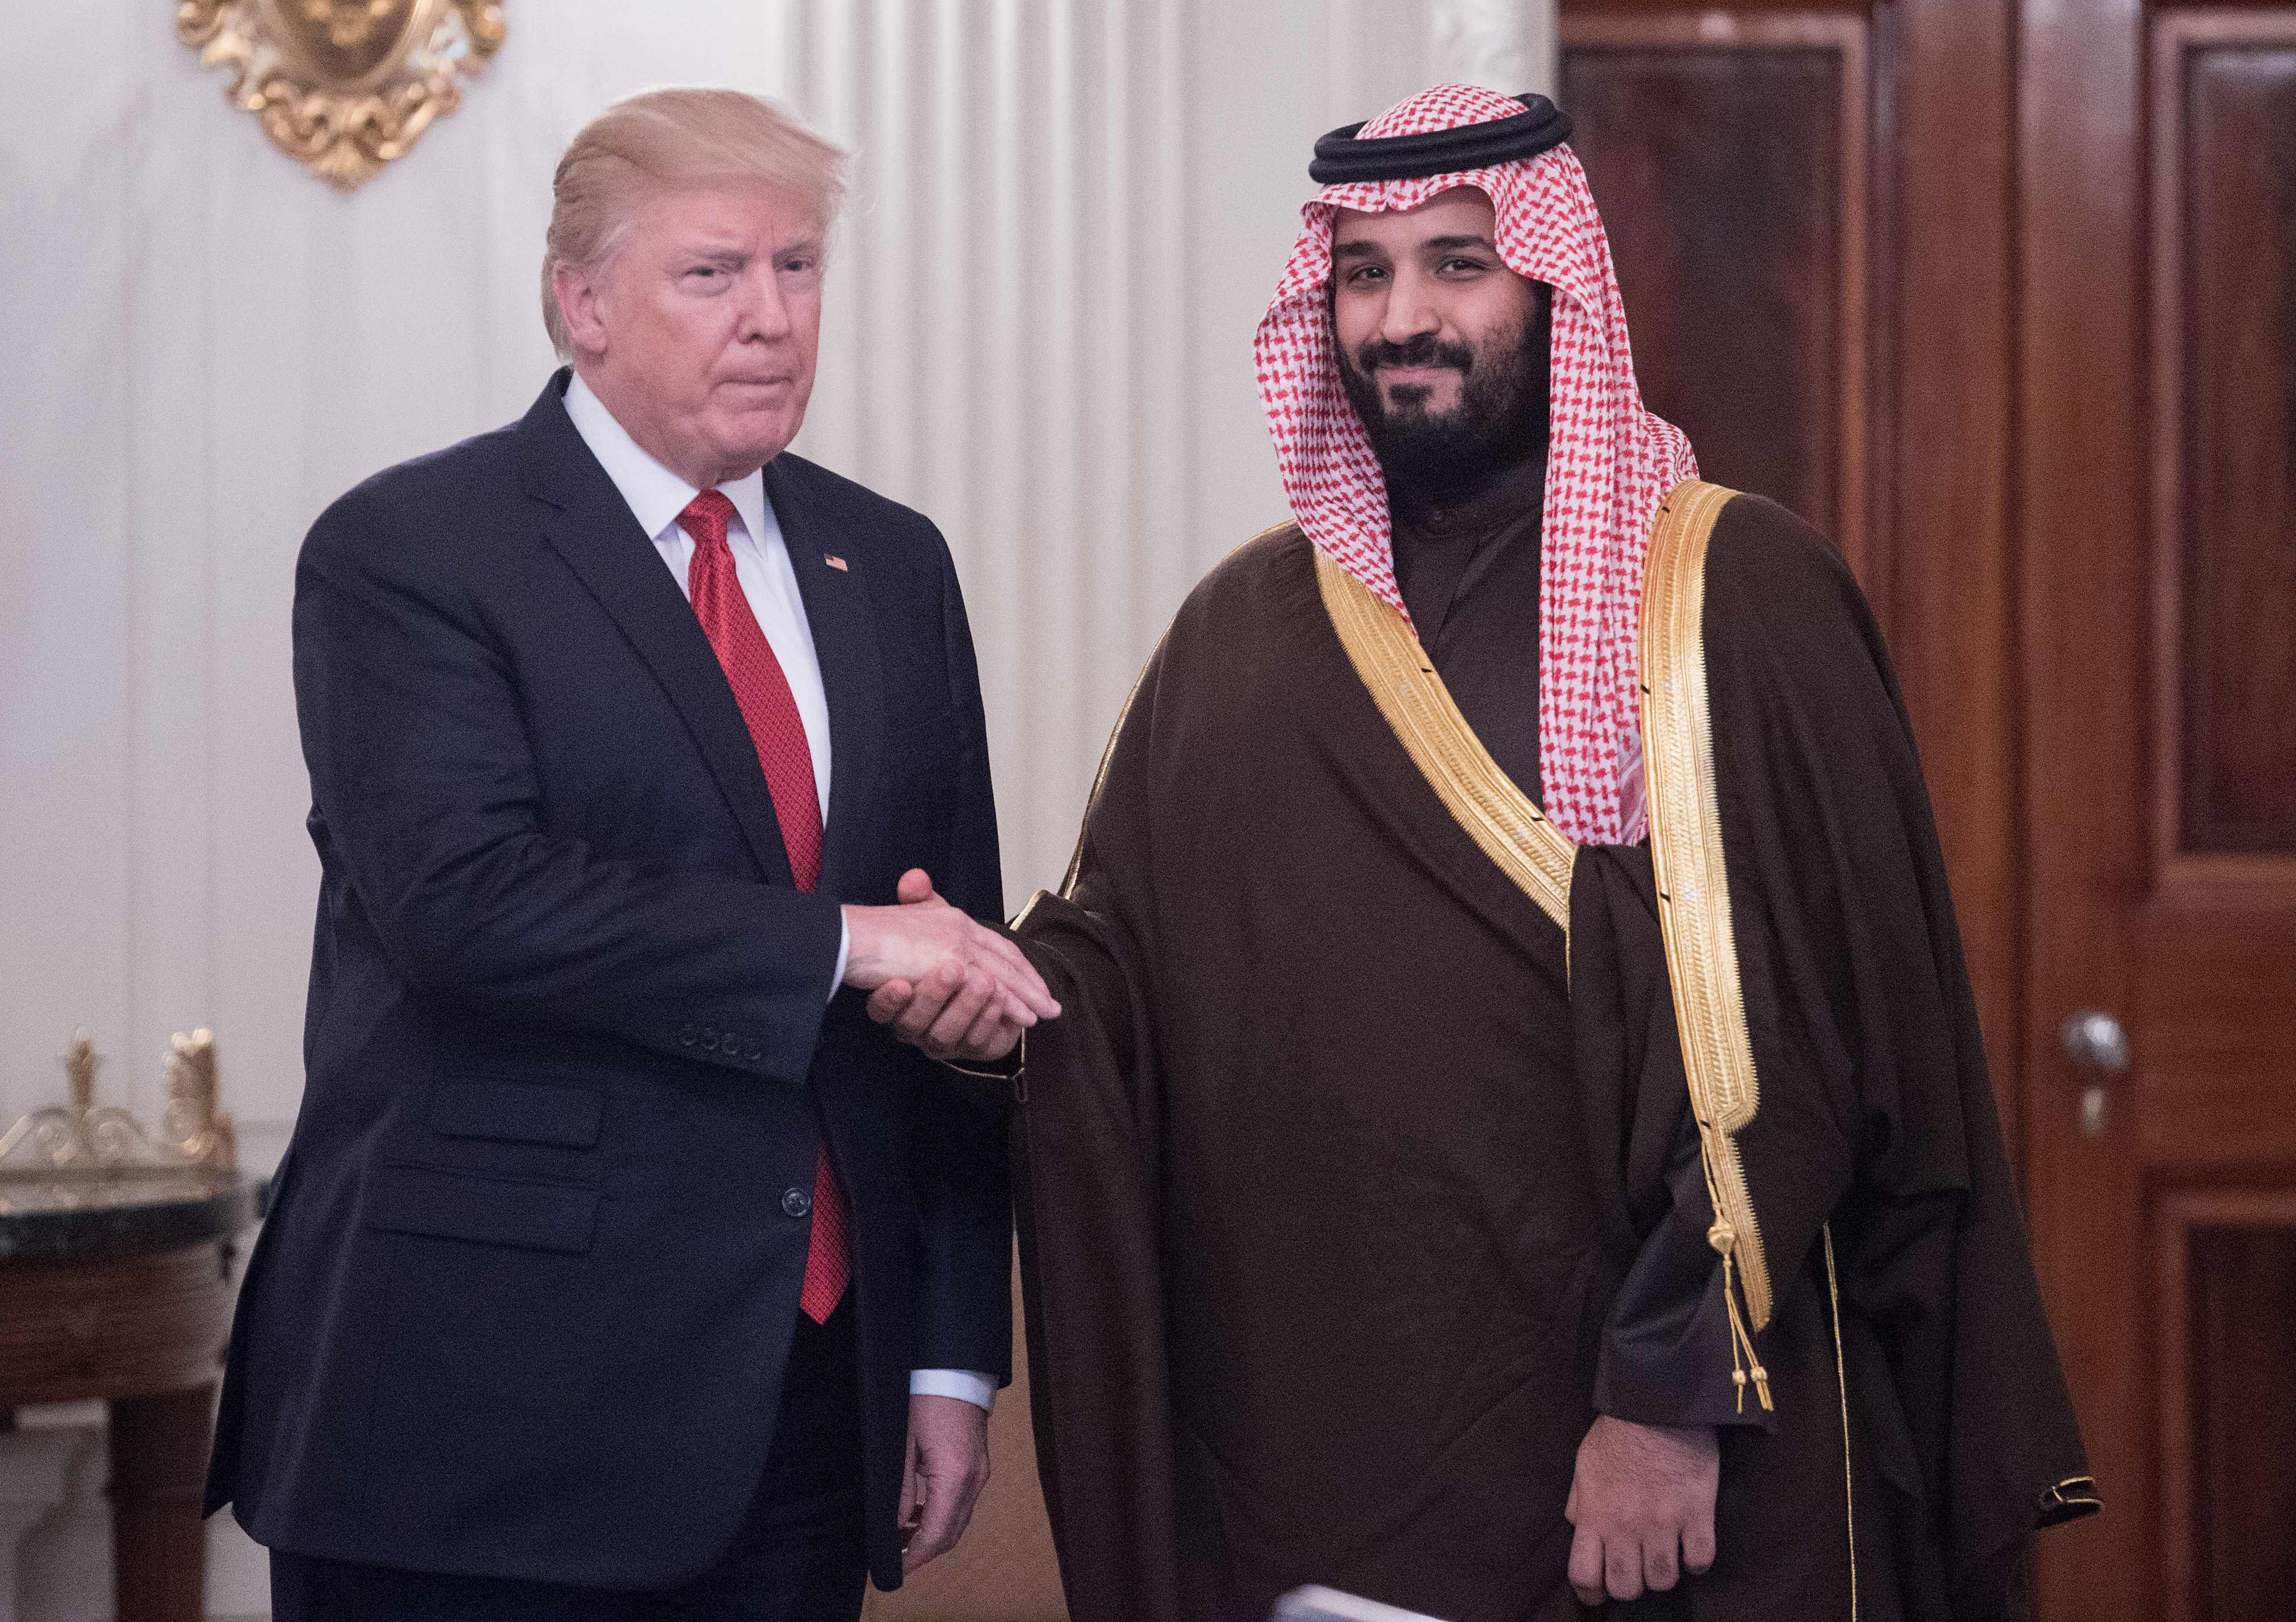 US President Donald Trump and Saudi Deputy Crown Prince and Defense Minister Mohammed bin Salman shake hands in the State Dining Room before lunch at the White House in Washington, DC, on March 14, 2017. Trump welcomed the prince to the Oval Office, as both countries expect to improve ties that were frequently strained under Barack Obama's administration. Saudi Arabia is likely to welcome Trump's harder line on its arch-rival Iran and there is likely to be less friction over Riyadh's war against Iranian-backed Huthi rebels in Yemen. (Photo: NICHOLAS KAMM/AFP via Getty Images)